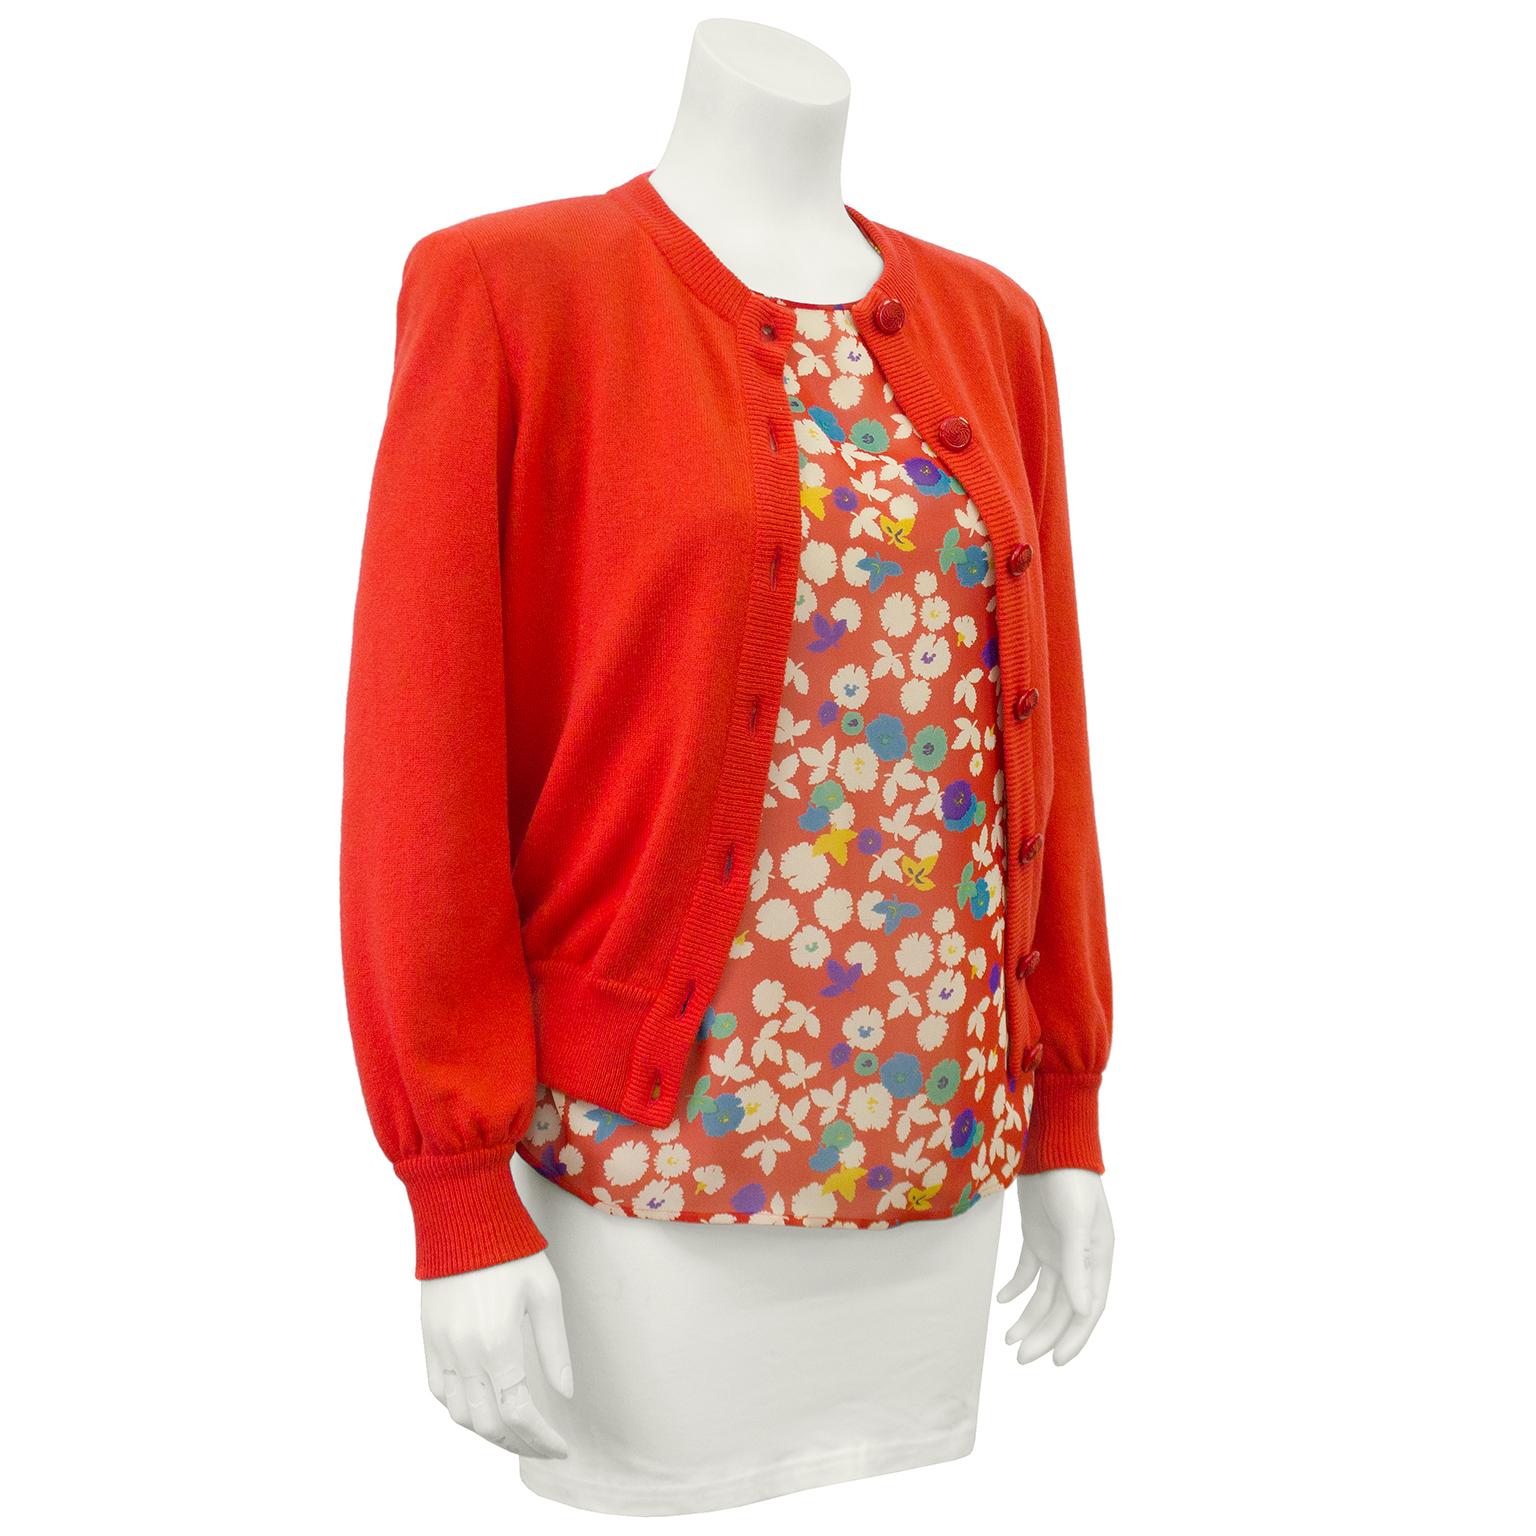 Valentino Night label red chiffon floral long sleeve blouse with red cashmere sweater set from the 1990s. The beautiful long sleeve blouse is made from a floral printed red chiffon with a zipper closure half way up the back. The red cashmere sweater